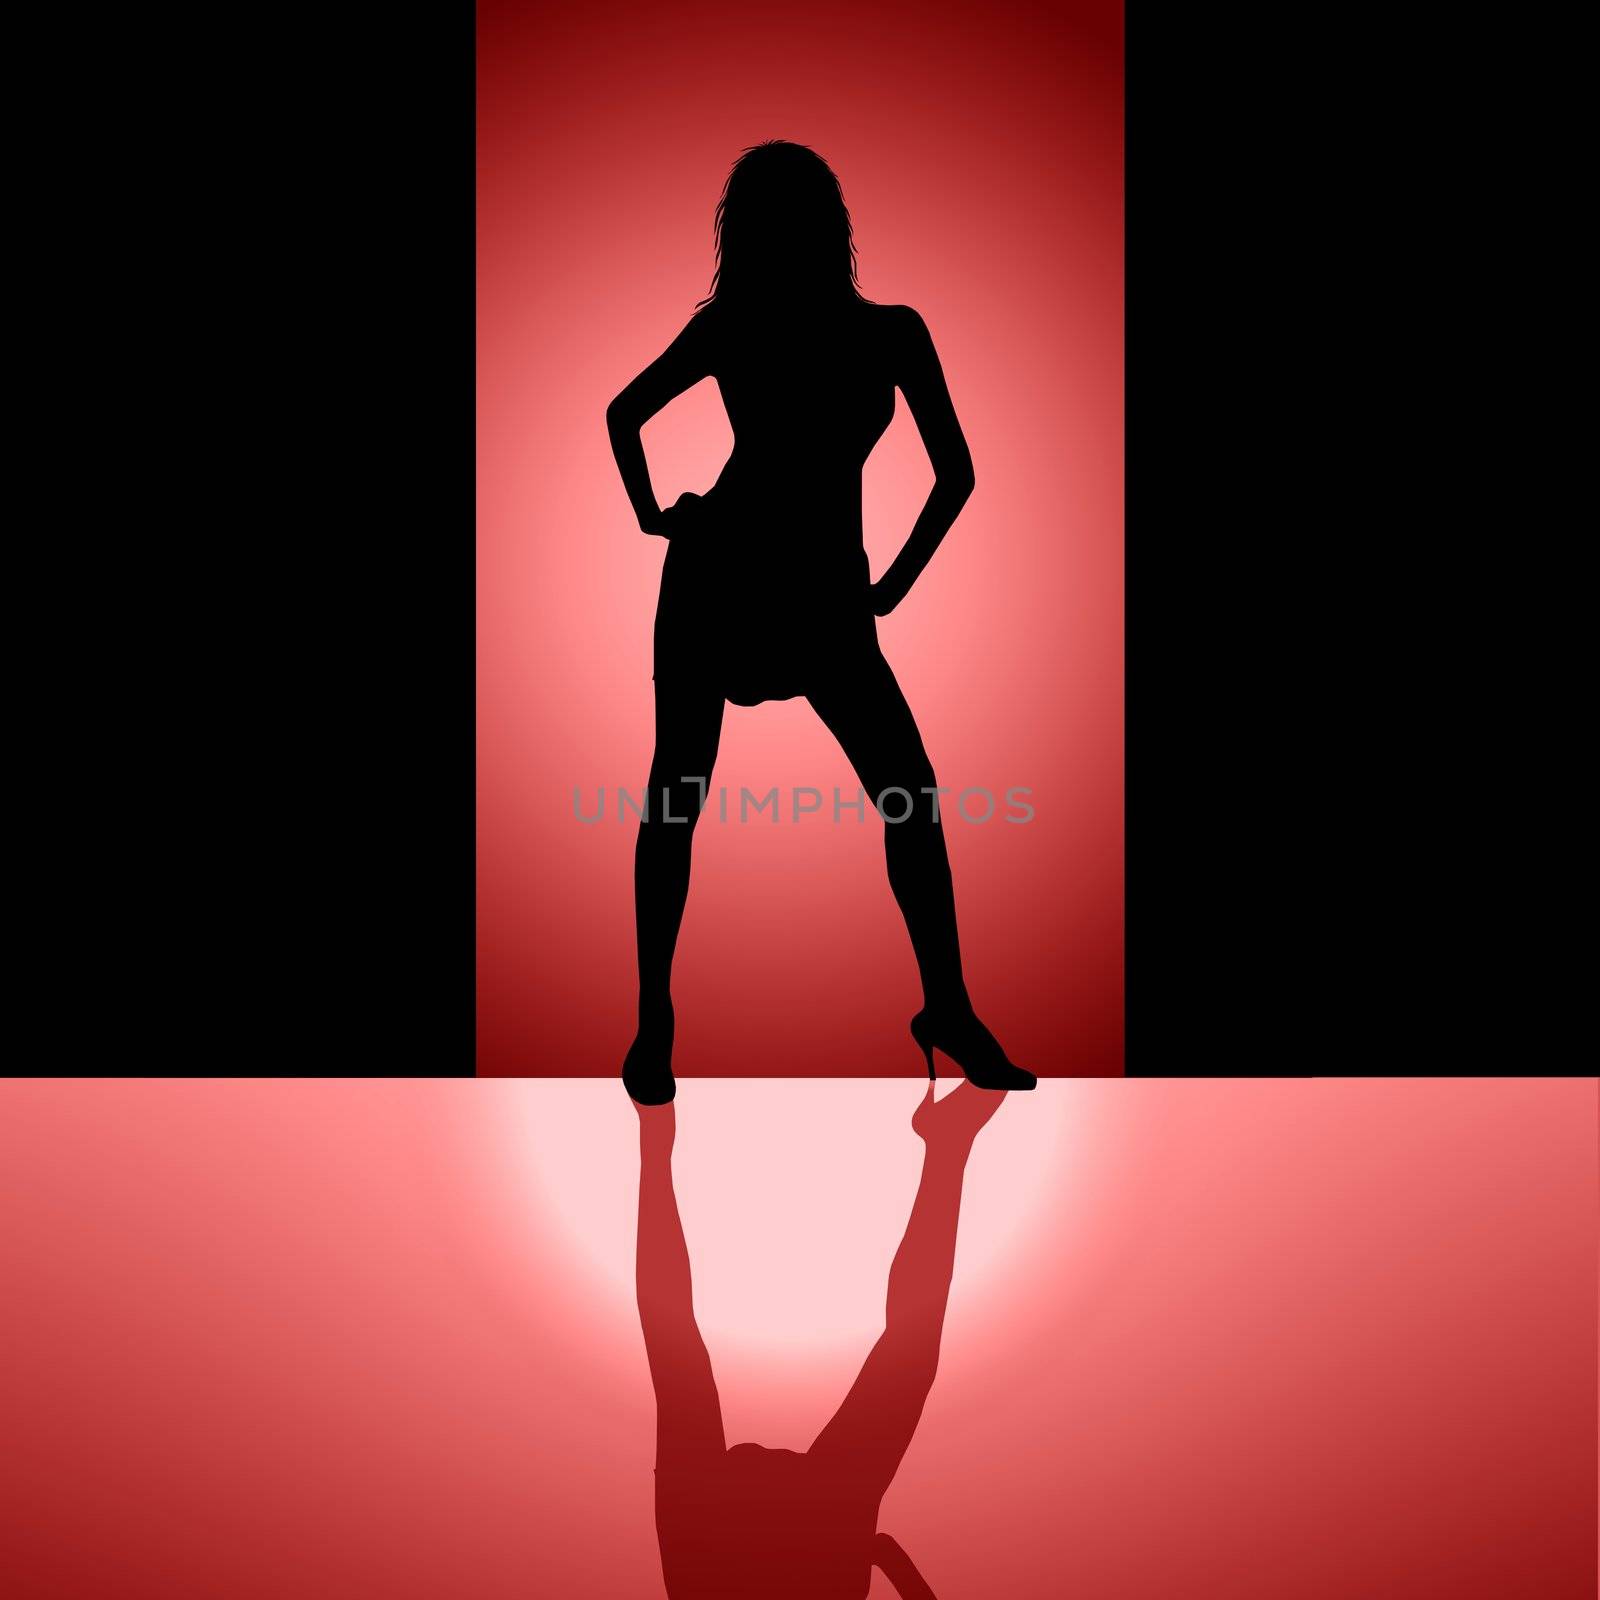 silhouette of a woman 